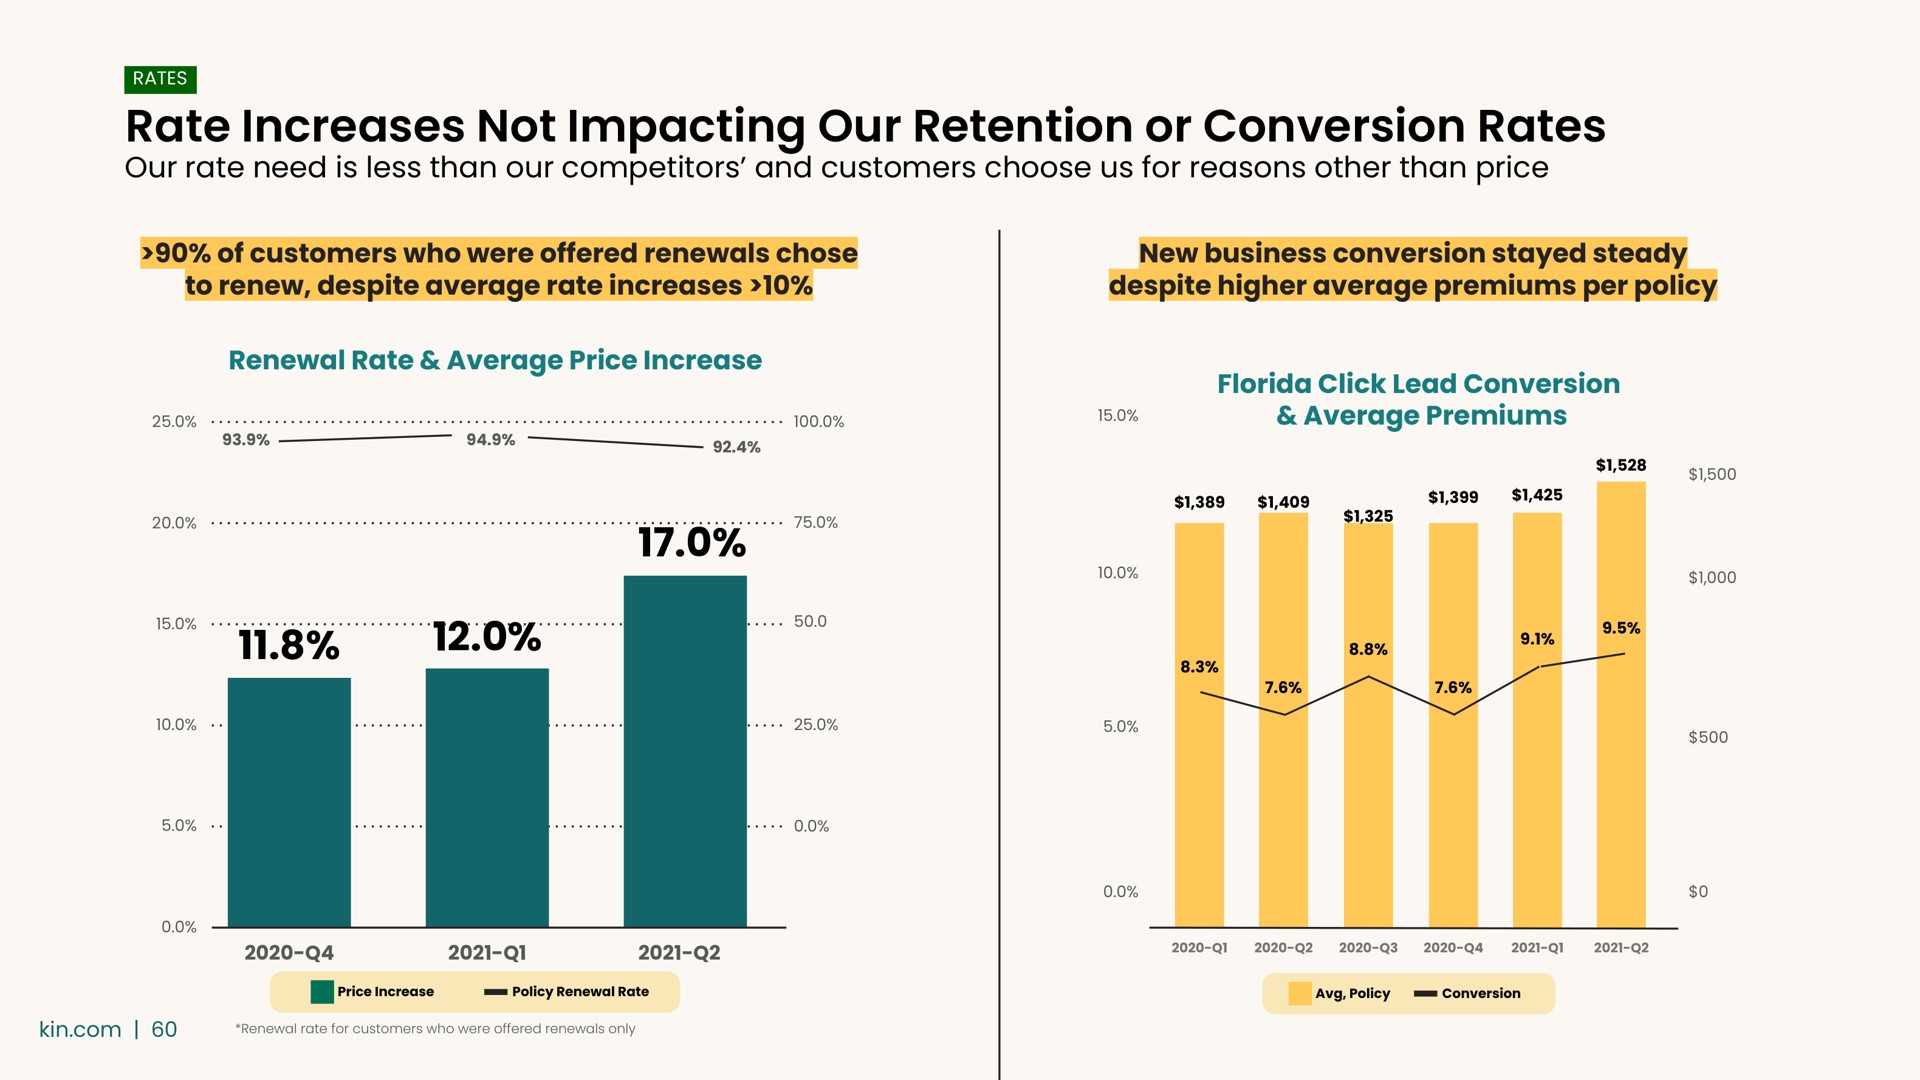 rate increases not impacting our retention or conversion rates | Kin